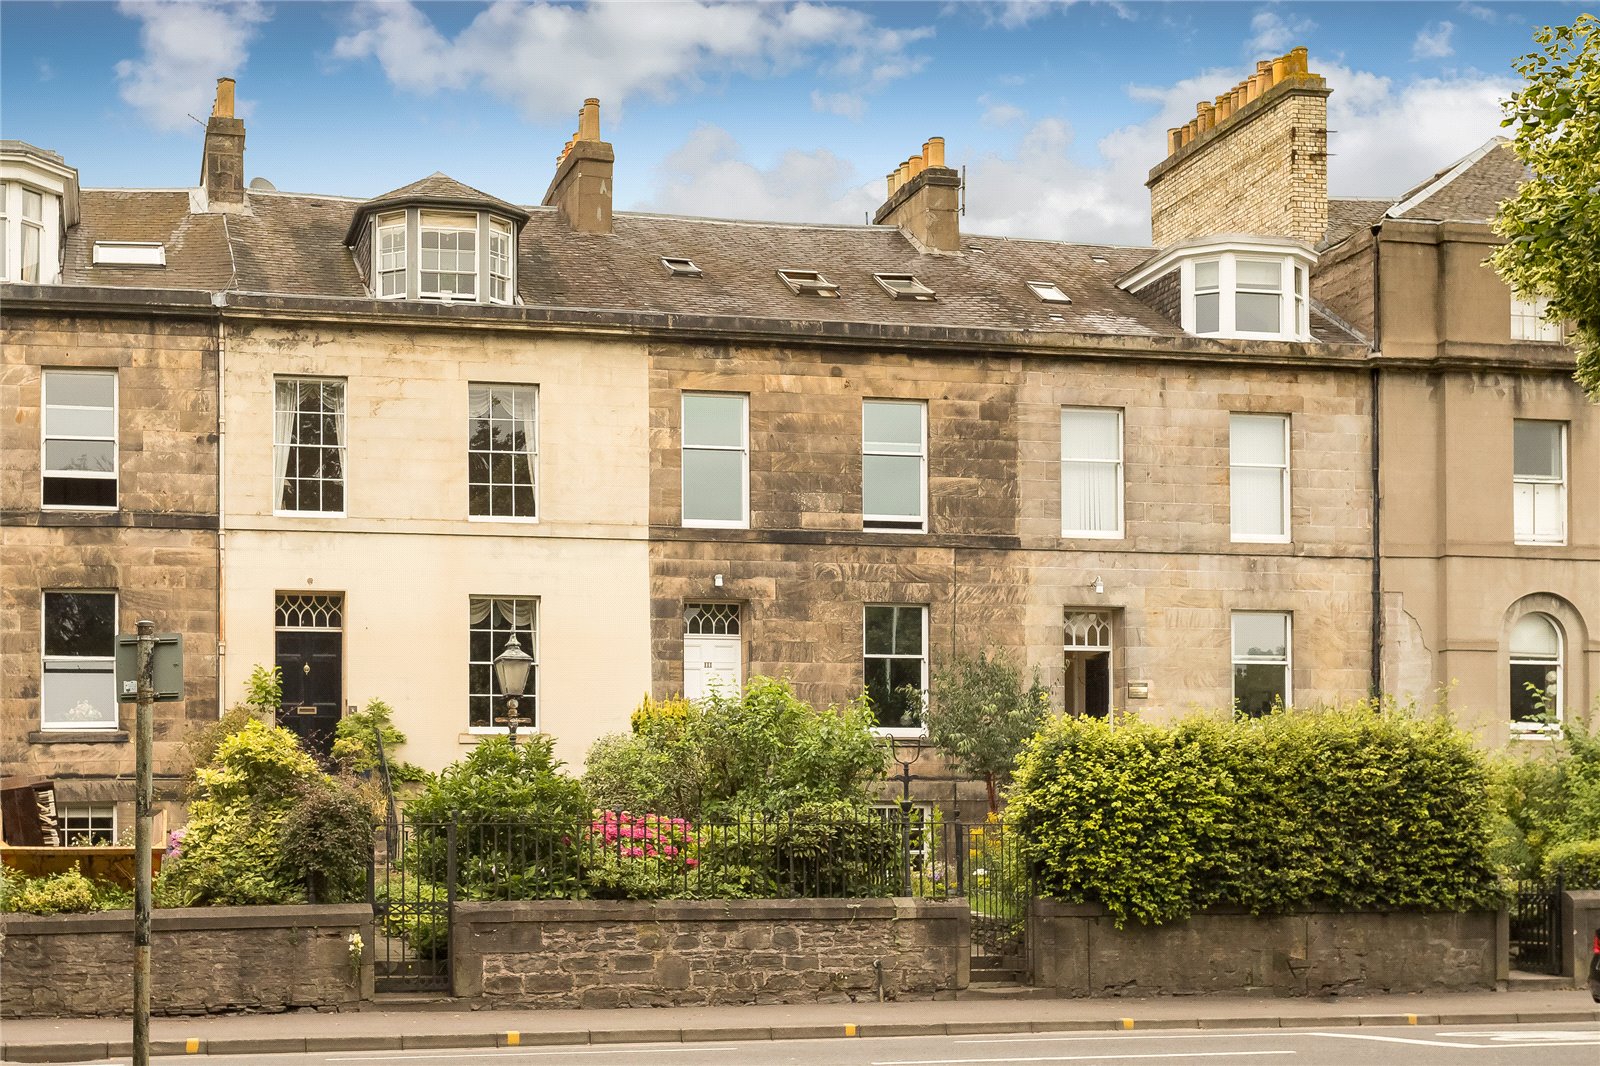 Our latest properties for sale and to let (12th August 2019)